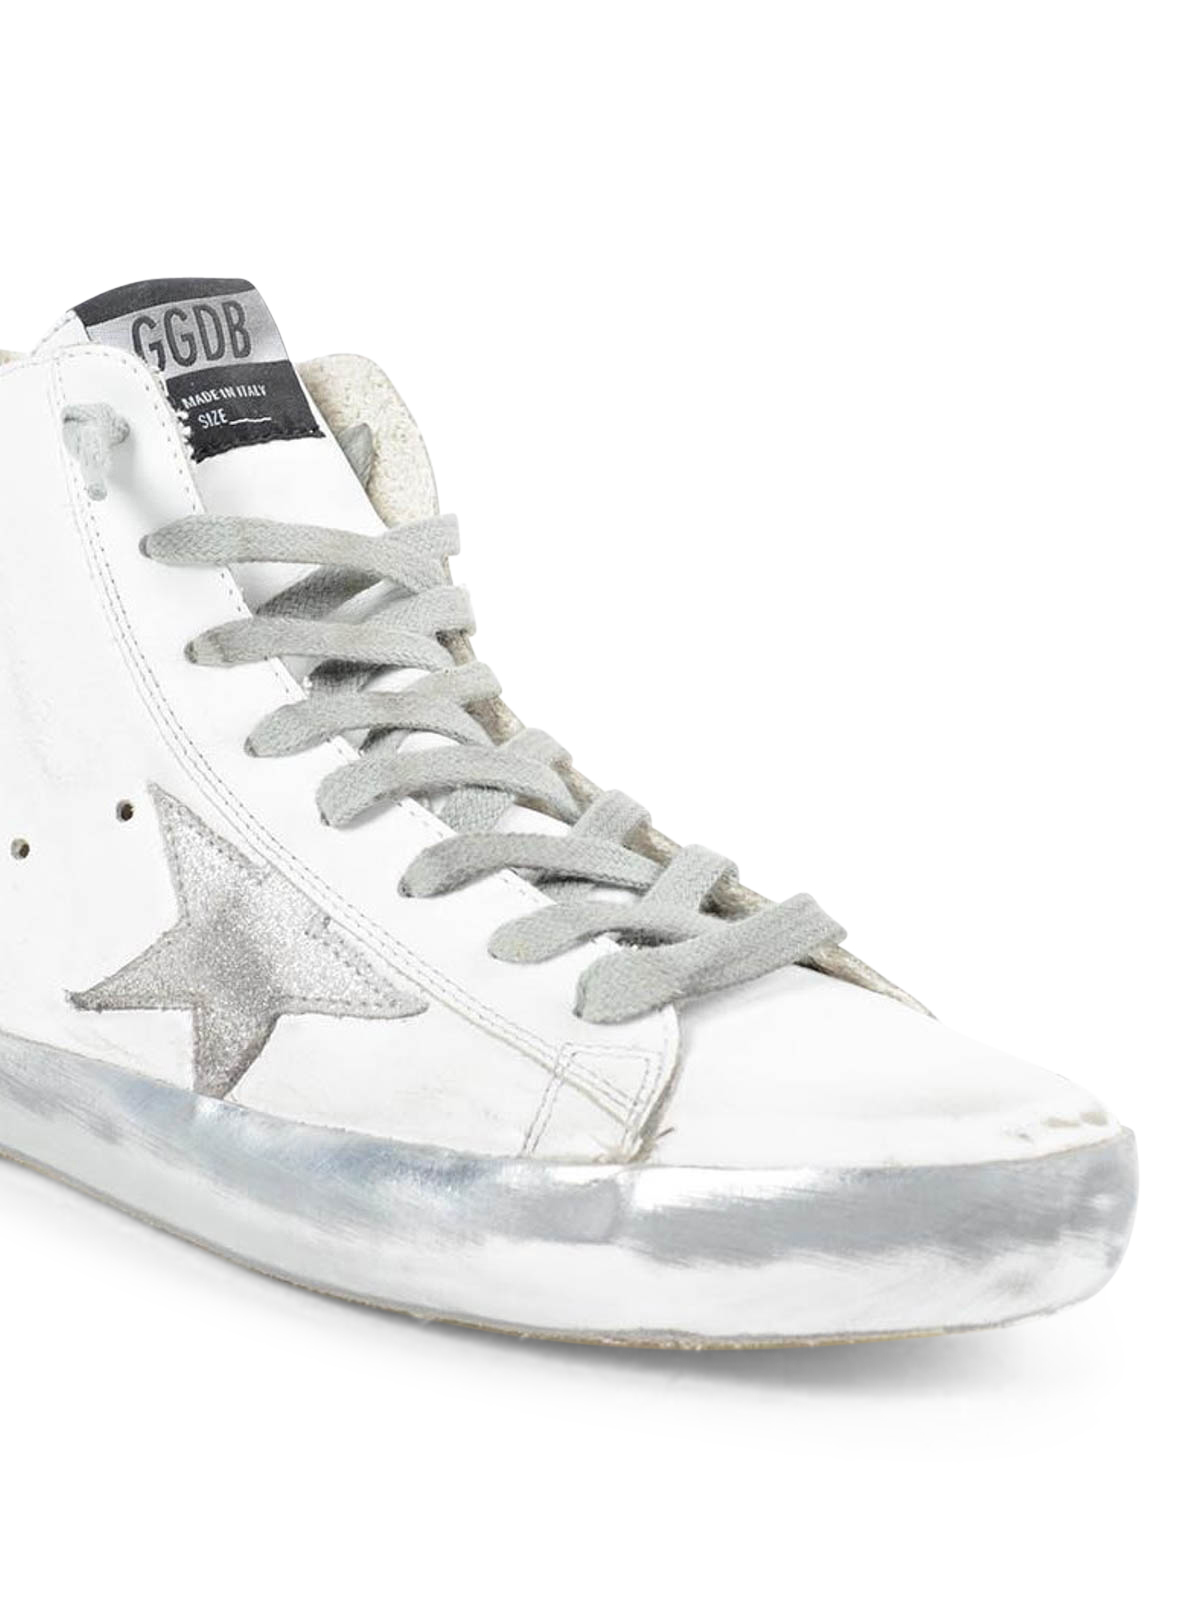 Golden Goose - Francy high-top leather sneakers - trainers - G28WS591 E361200 x 1600